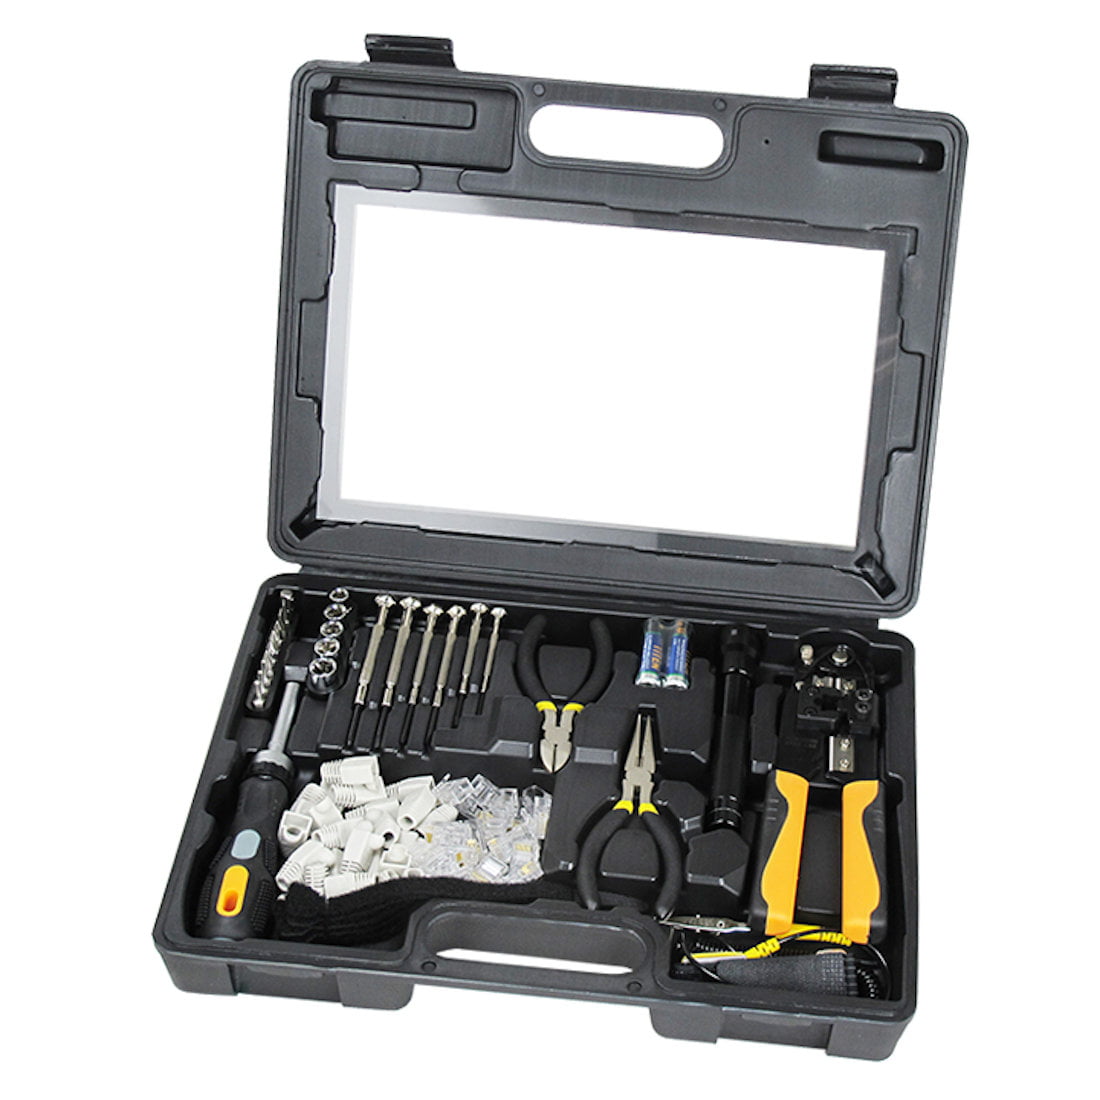 STK-985 85 Piece Computer and Networking Tool Kit